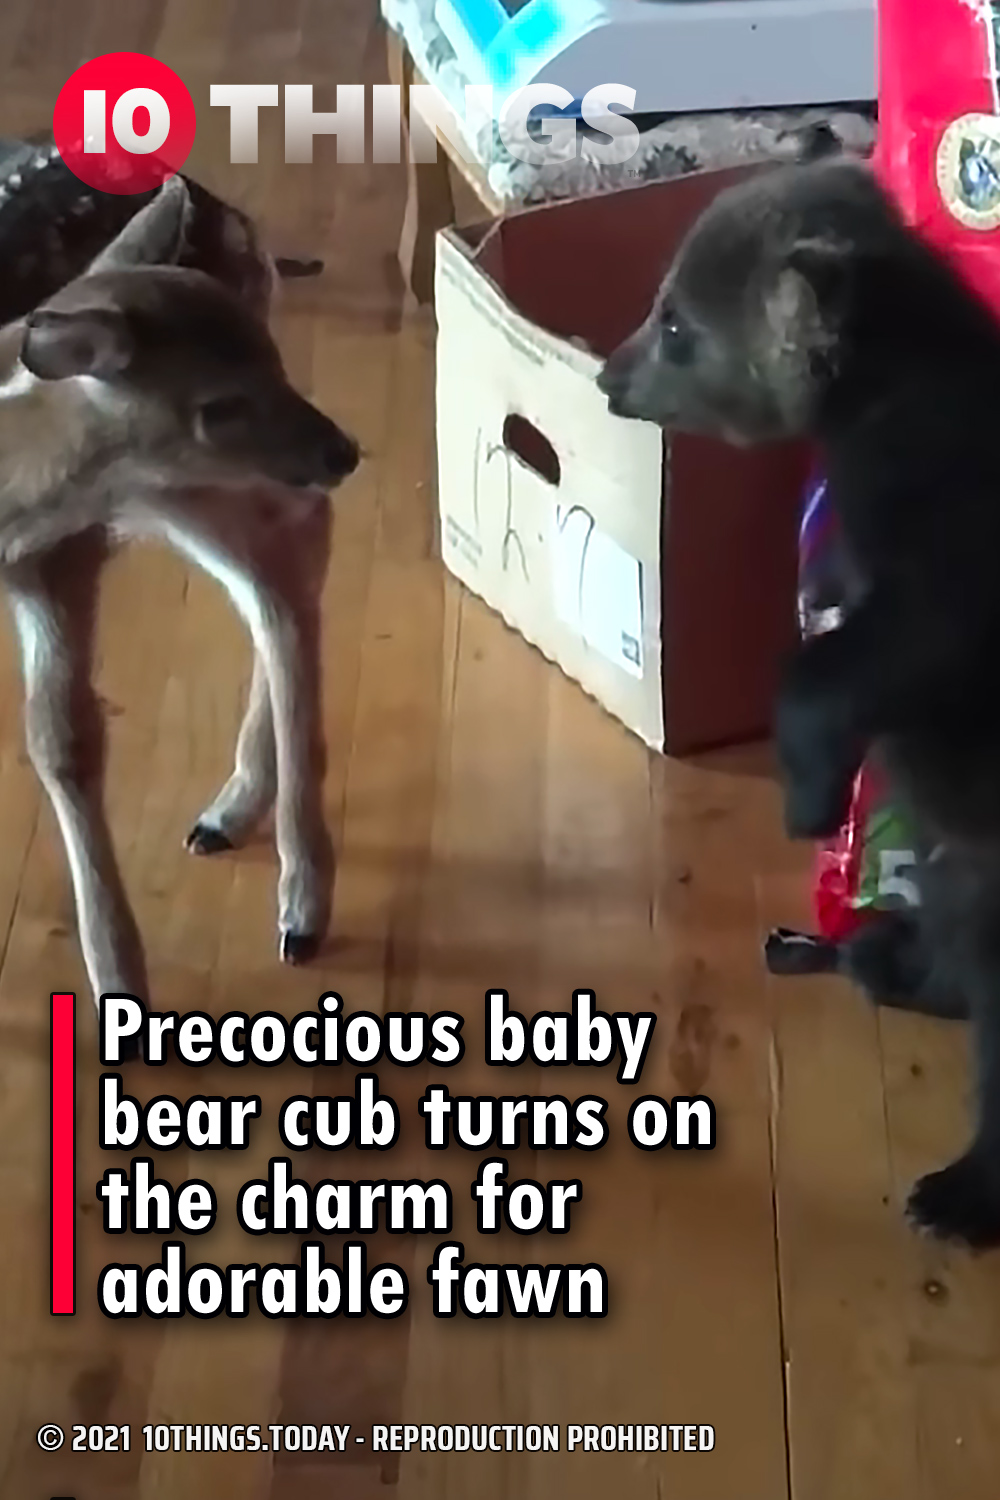 Precocious baby bear cub turns on the charm for adorable fawn